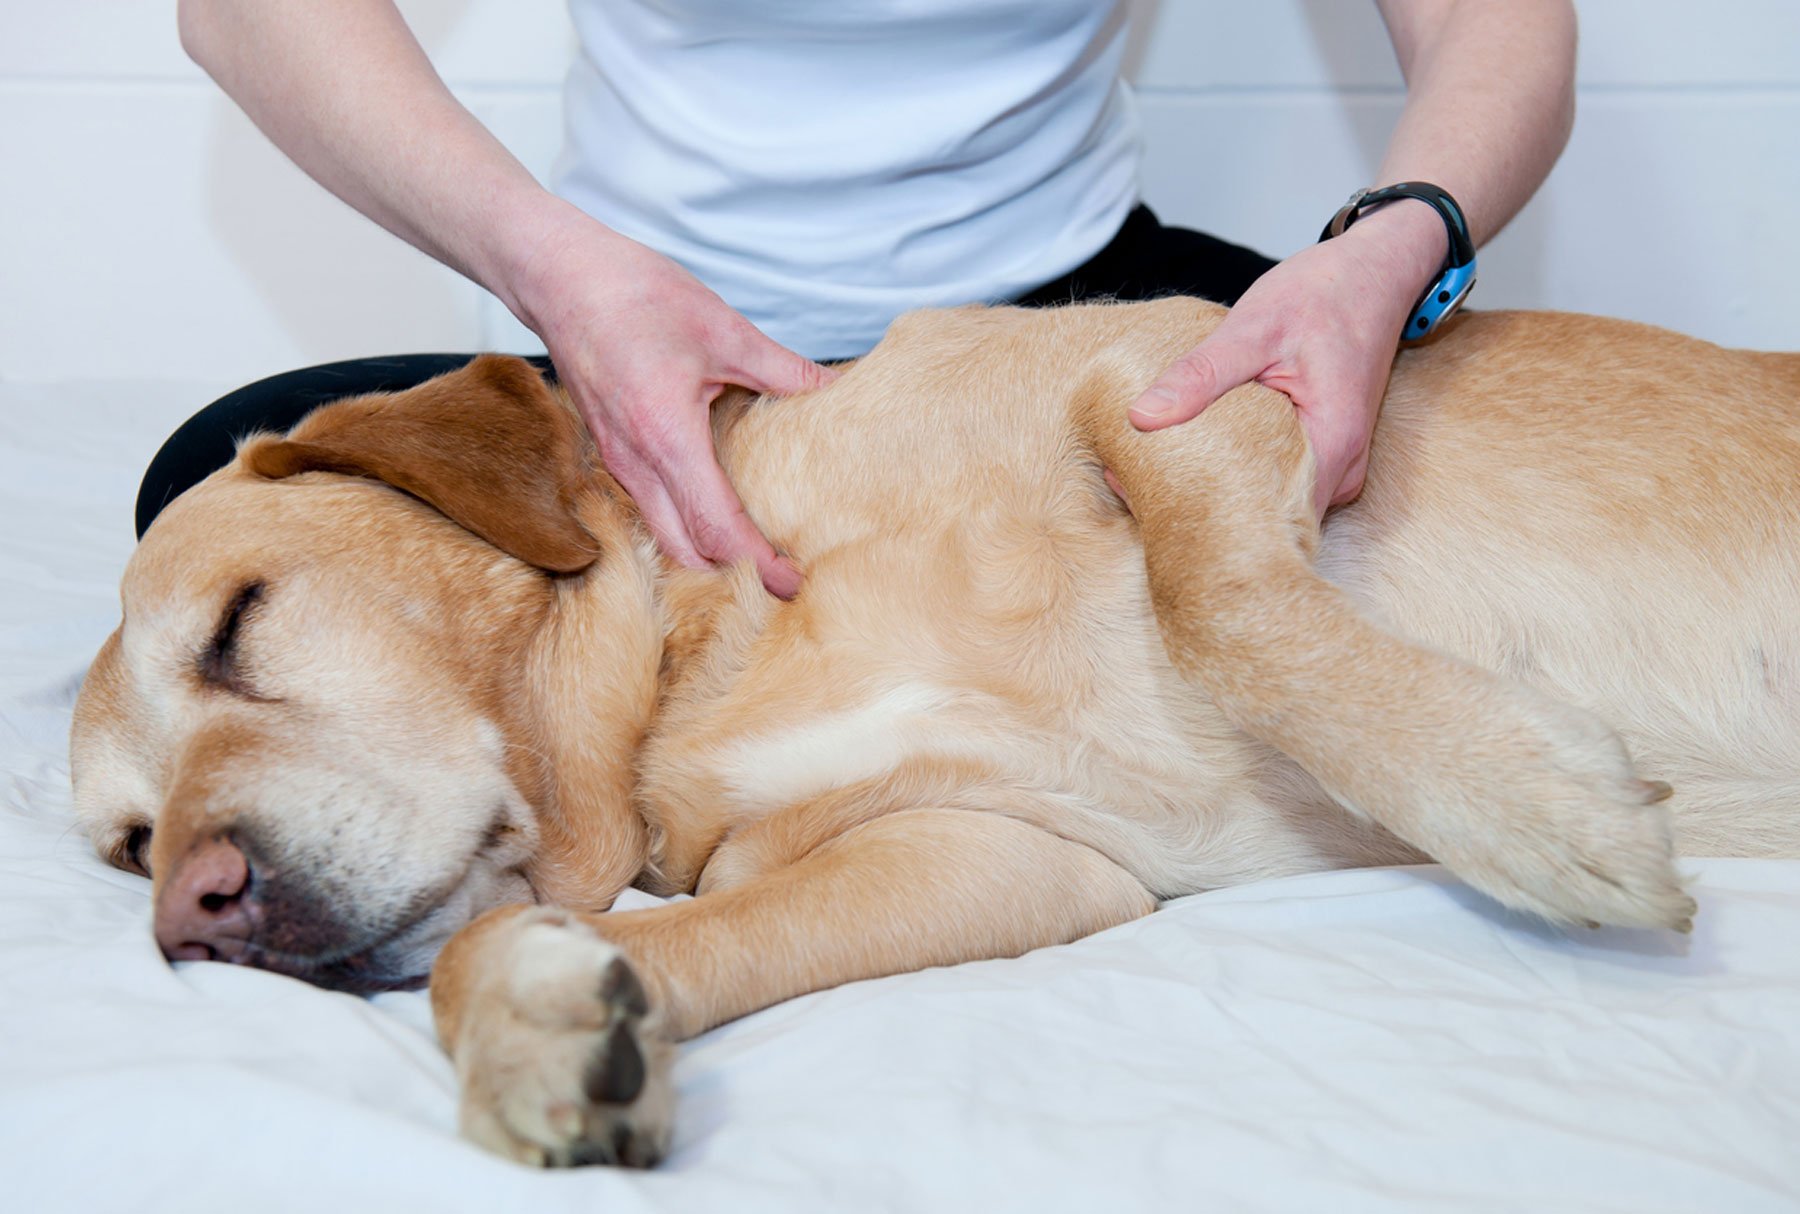 Canine Massage is a great way to combat pain